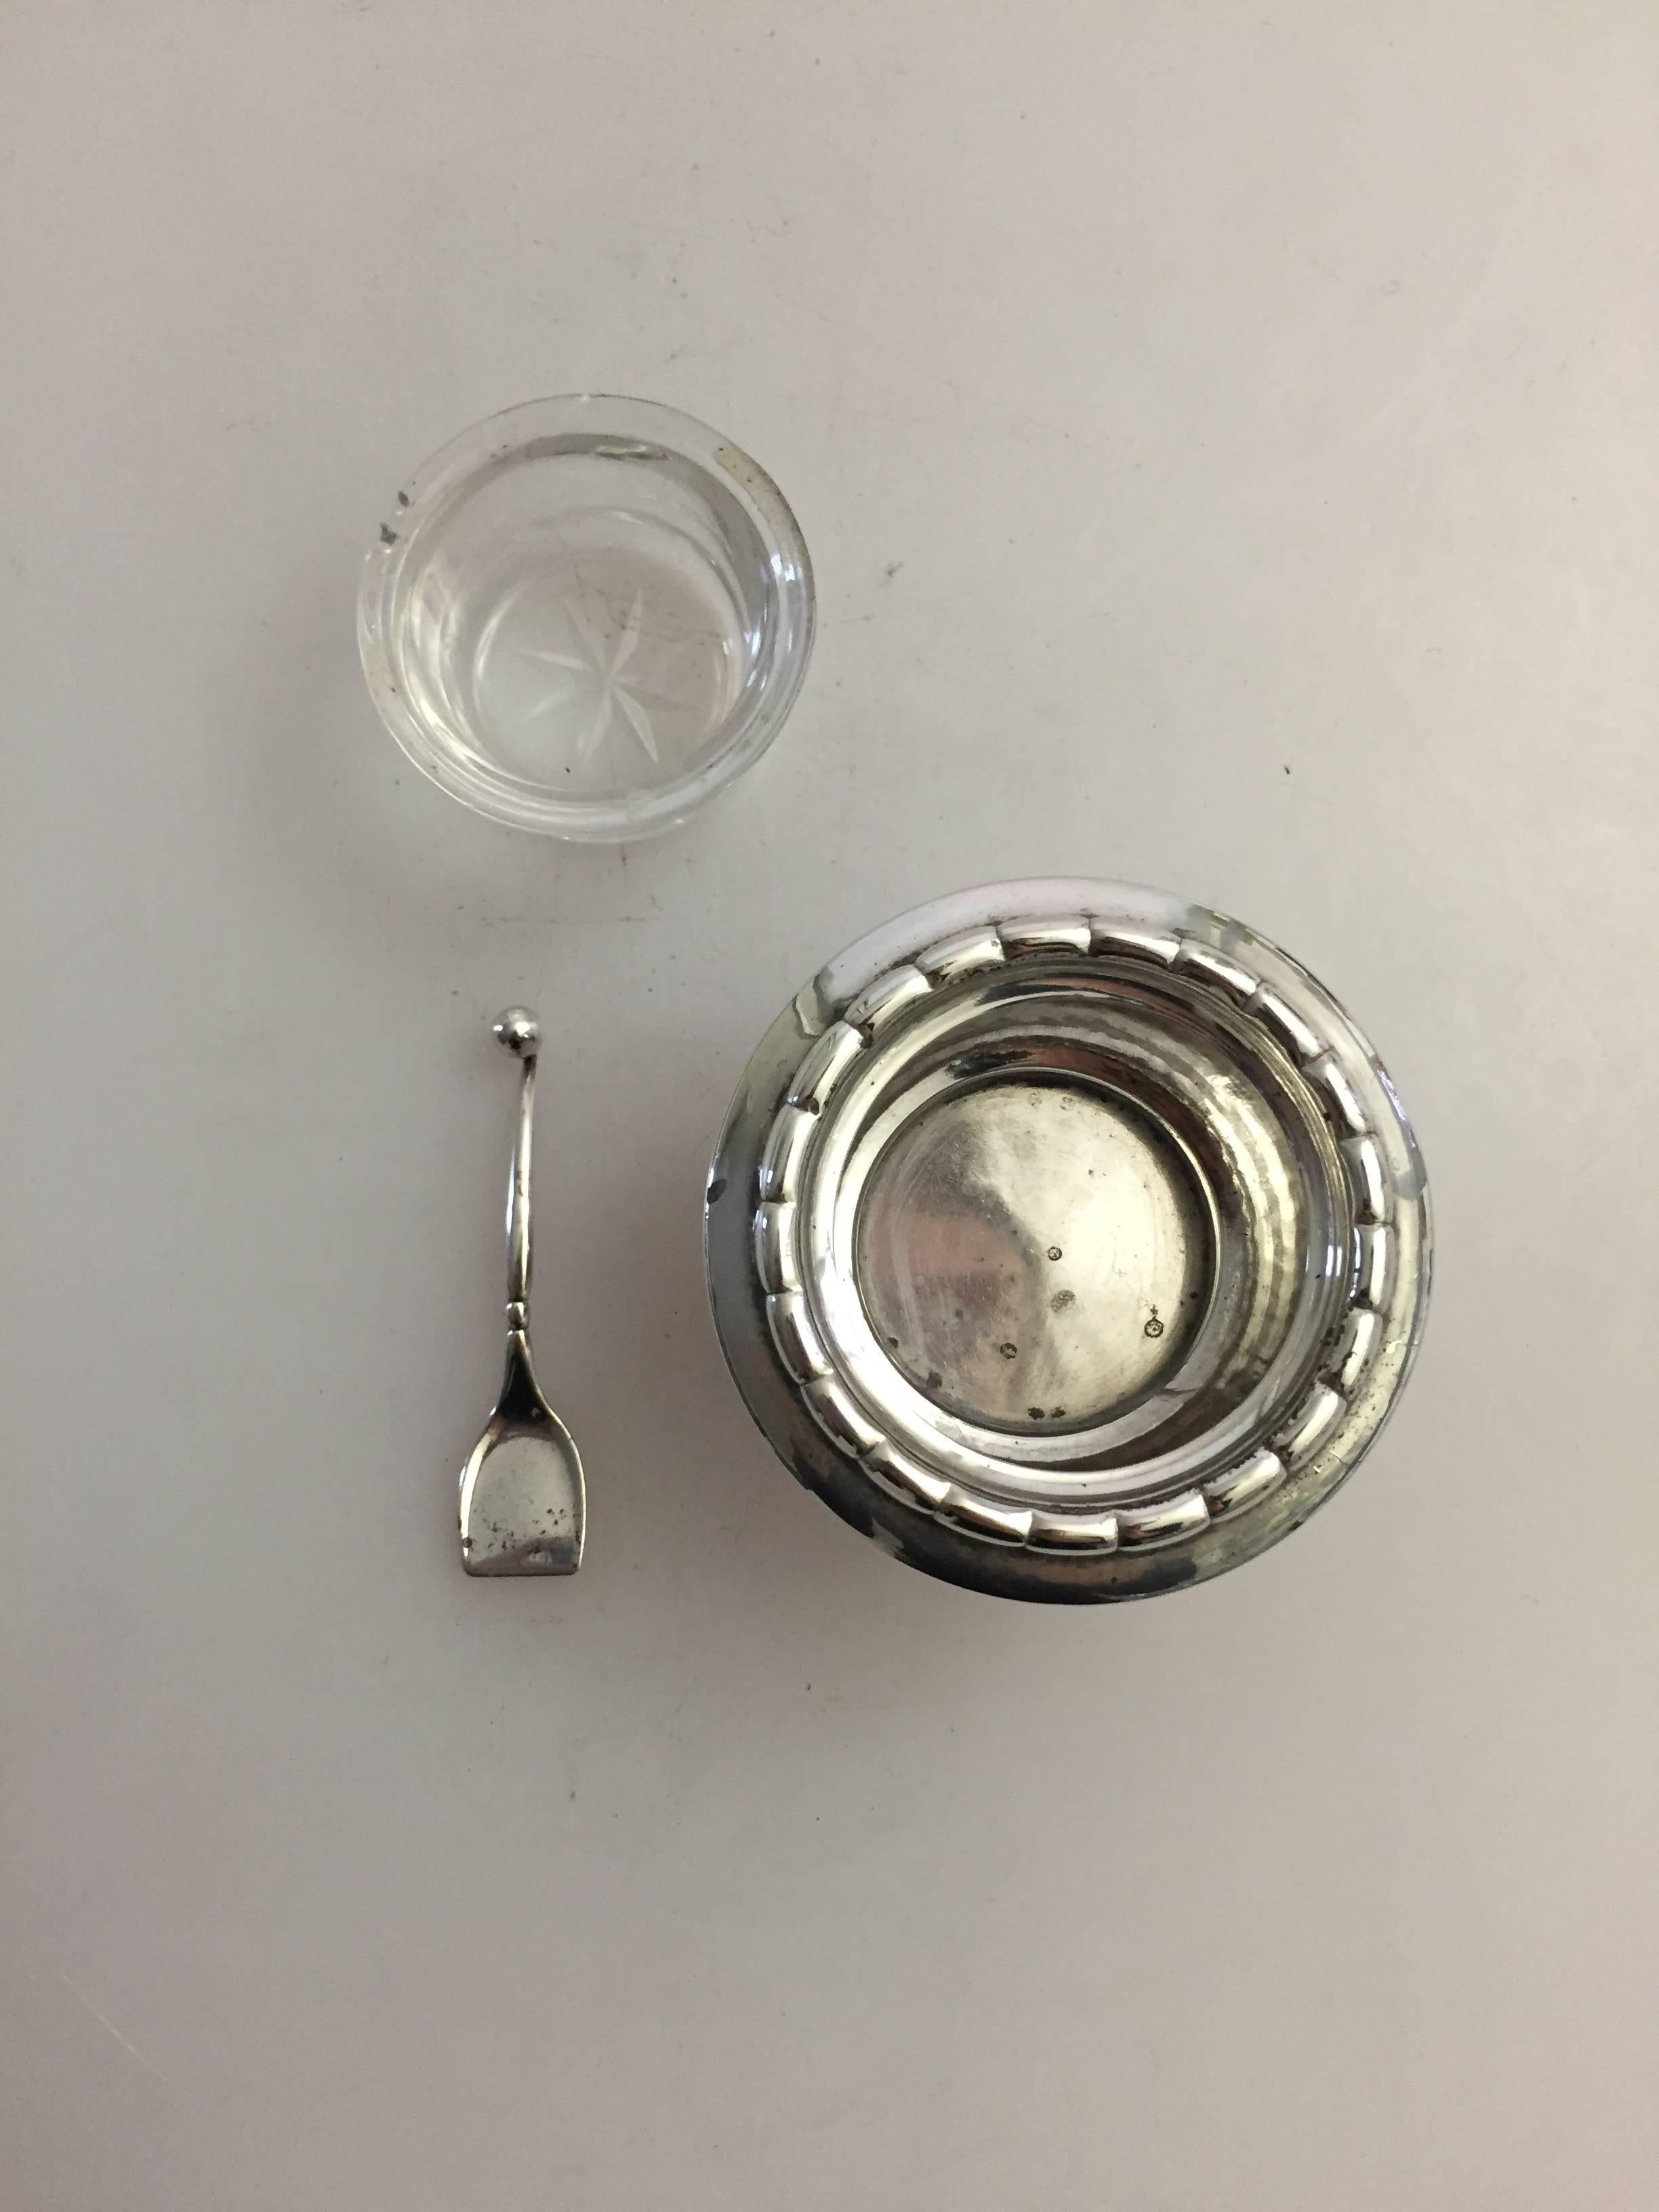 20th Century Georg Jensen Sterling Silver Salt Dish #236 with Spoon #130 For Sale